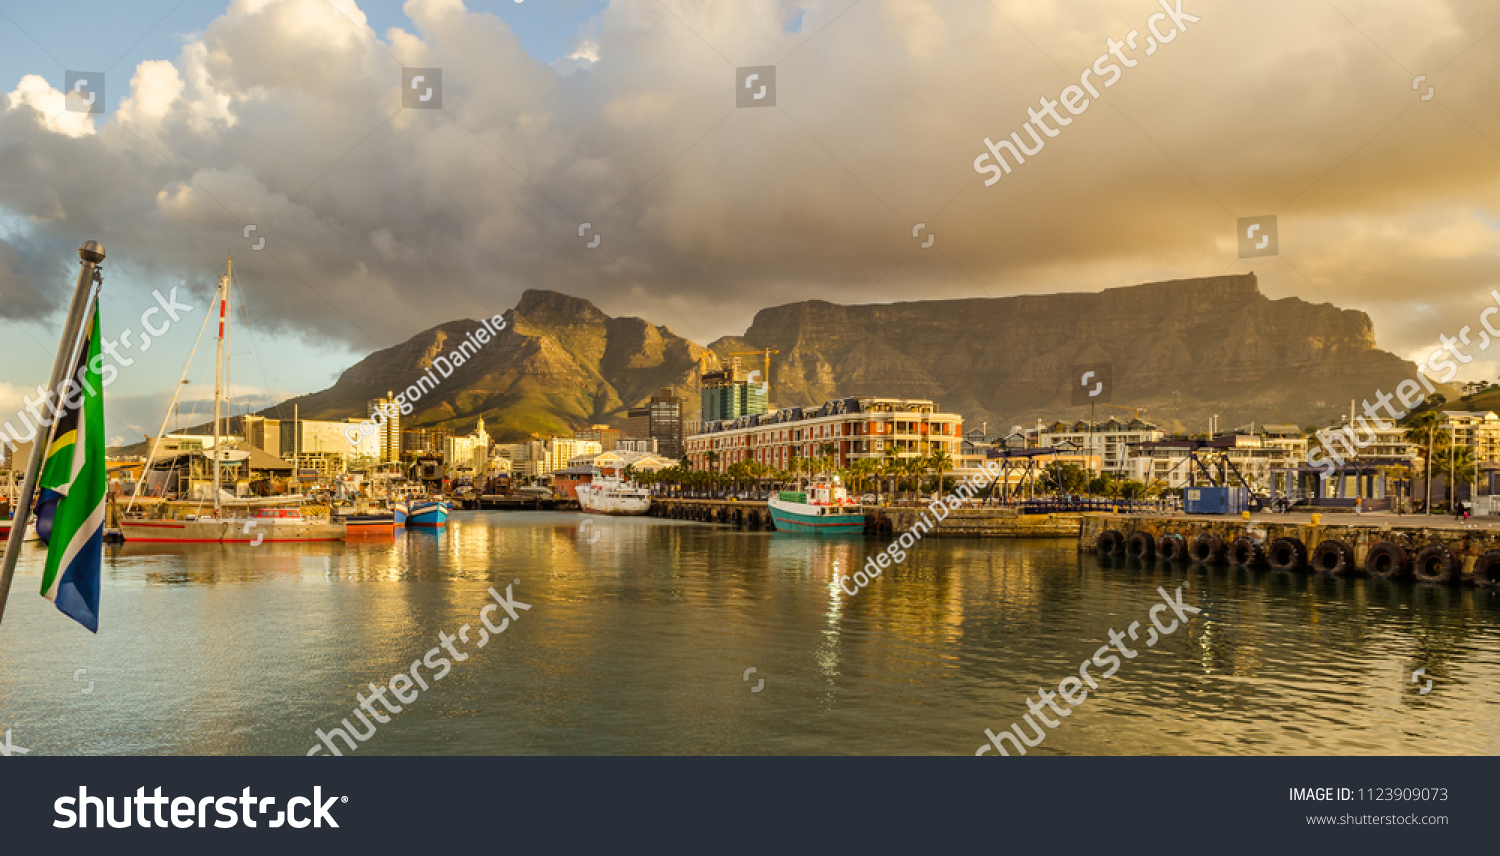 Cape Town harbor, Victoria and Alfred Waterfront at sunset with south african flag. Table mountain in background, South Africa beautiful destination #1123909073